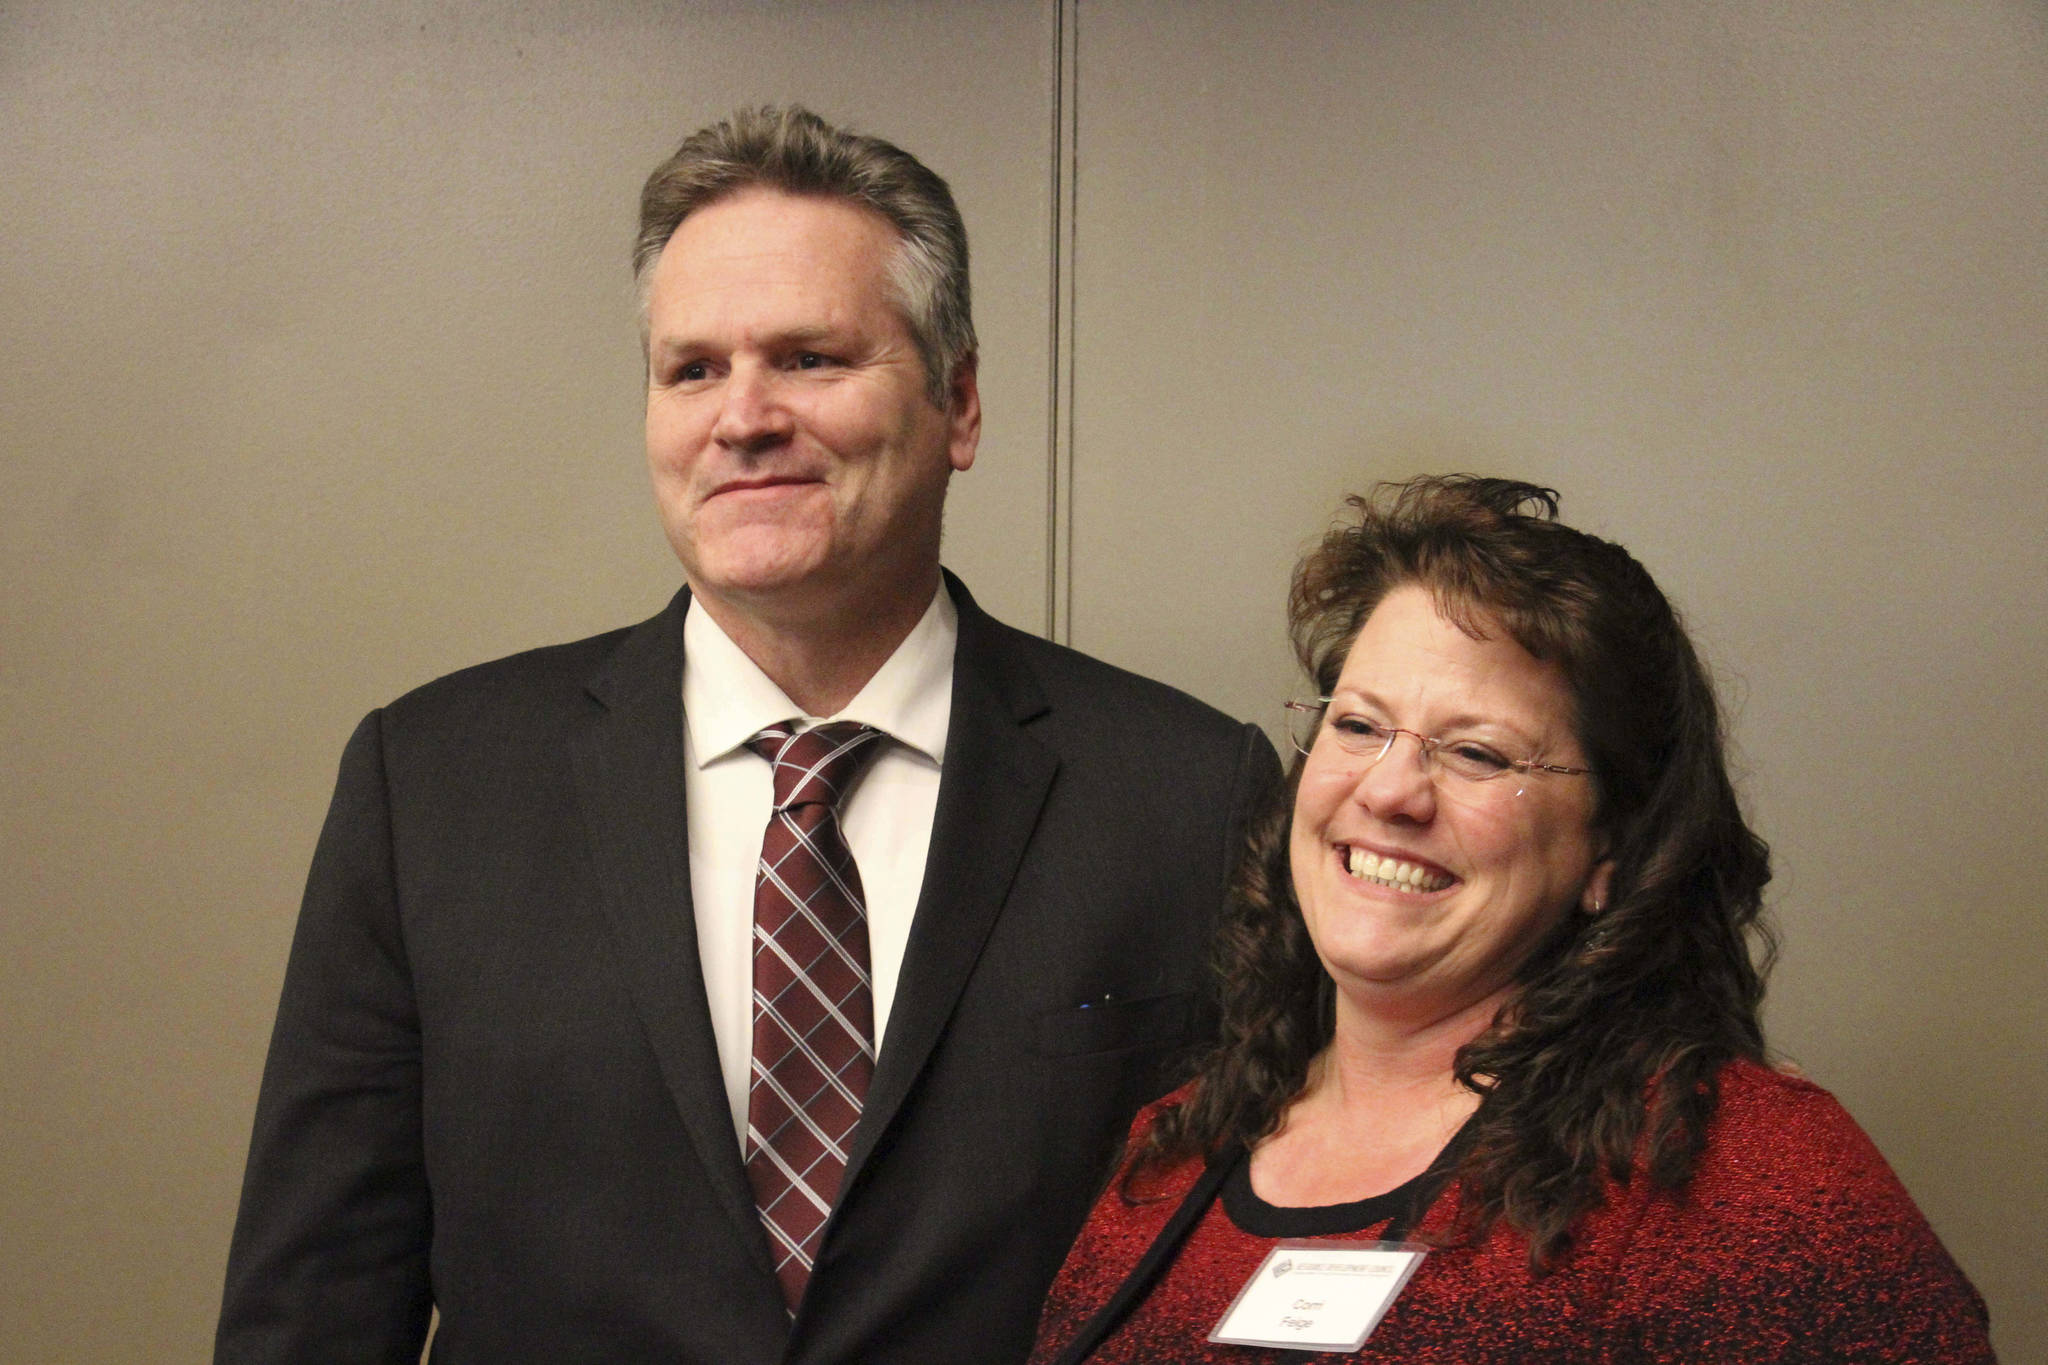 Alaska Gov.-elect Mike Dunleavy, left, poses with Corri Feige, whom Dunleavy named Wednesday, Nov. 14, 2018, during a speech in Anchorage, Alaska, as his commissioner of Natural Resources. Feige has spent her career working in the energy sector, including as a geophysicist and consultant and in management-level positions. (AP Photo/Mark Thiessen)